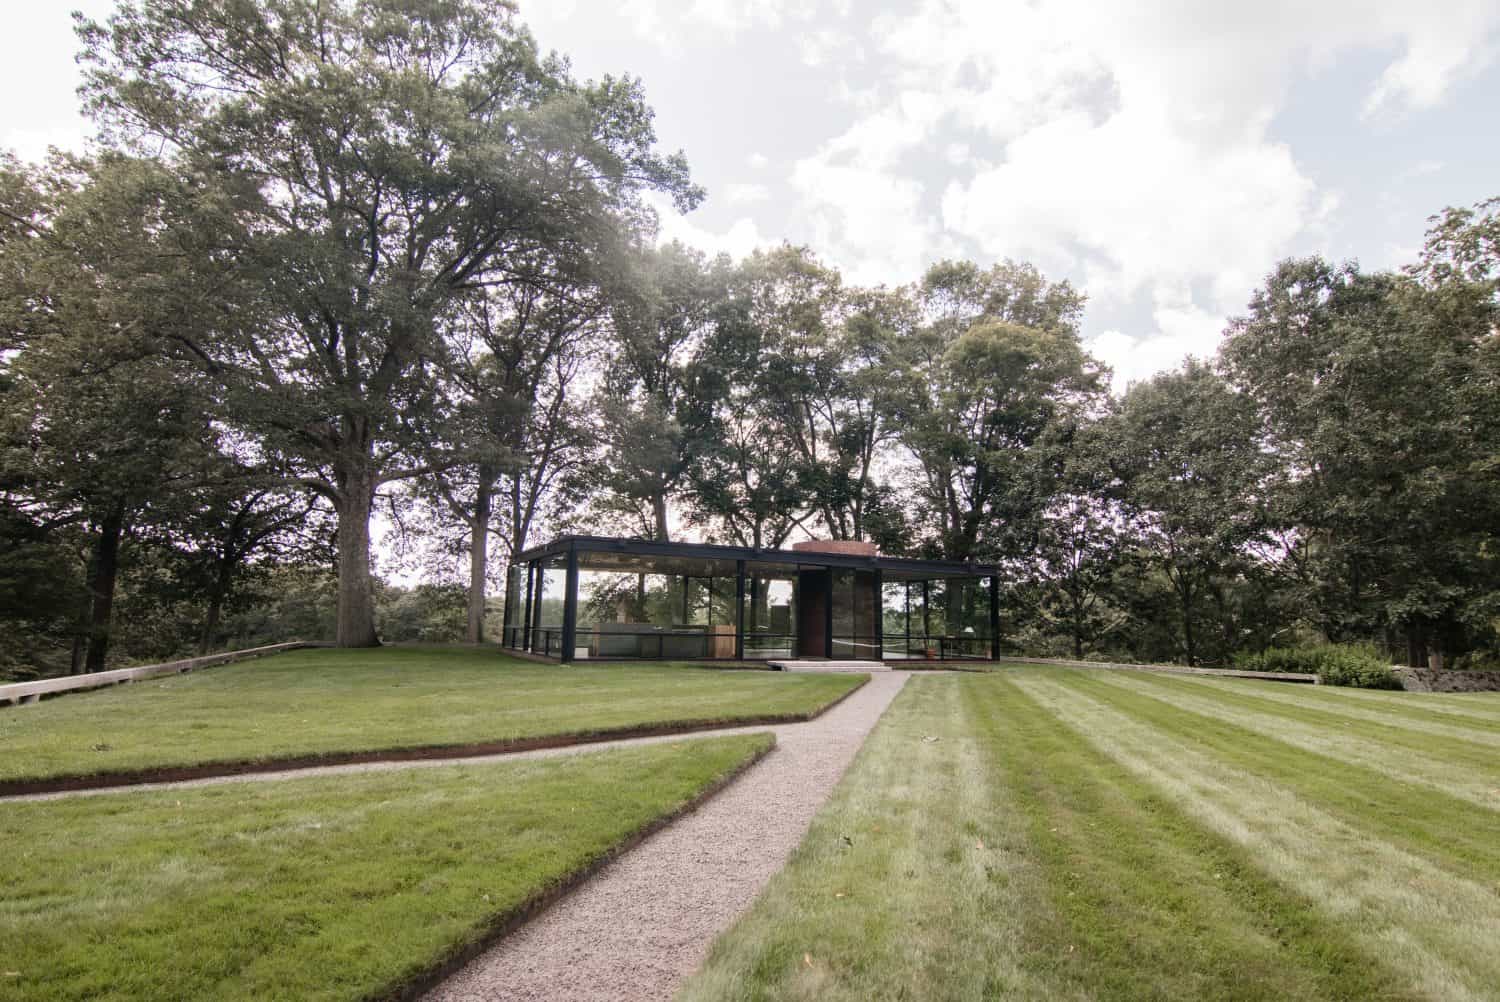 Exterior of Philip Johnson's glass house in New Canaan, CT. Bright photo with a lot of green. No people in photo.